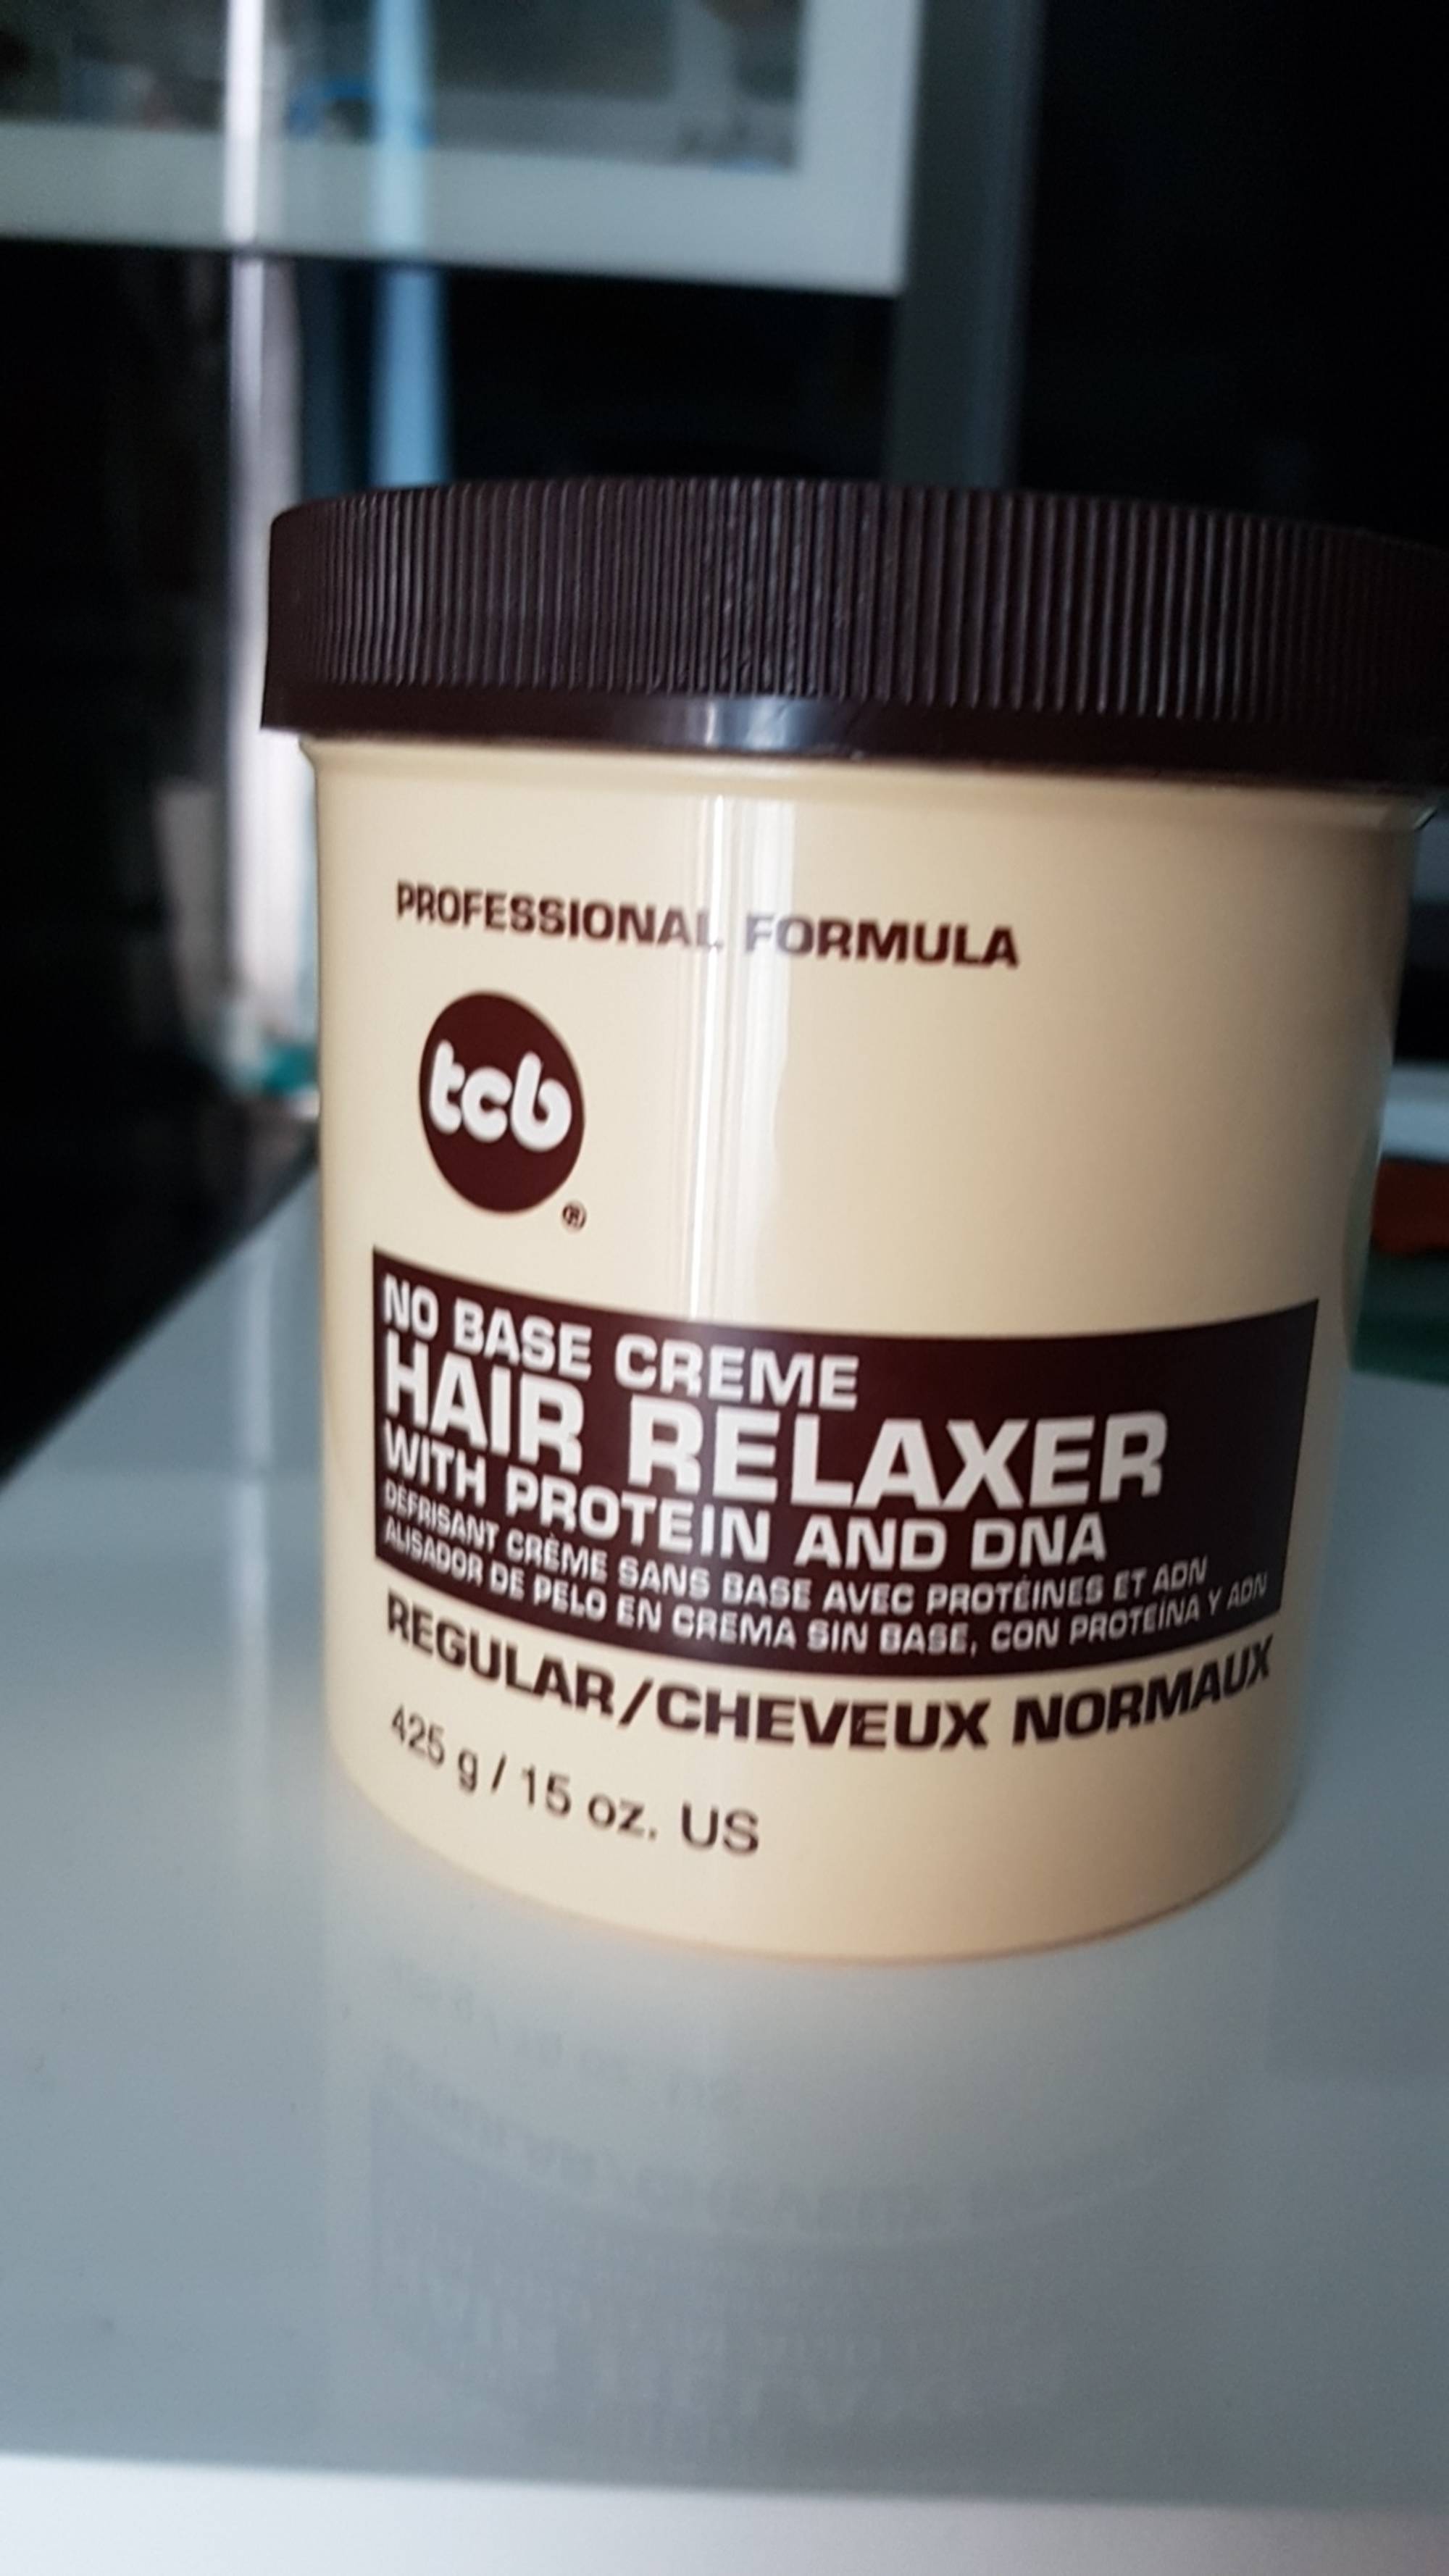 TCB - Base creme hair relaxer with protein and dna